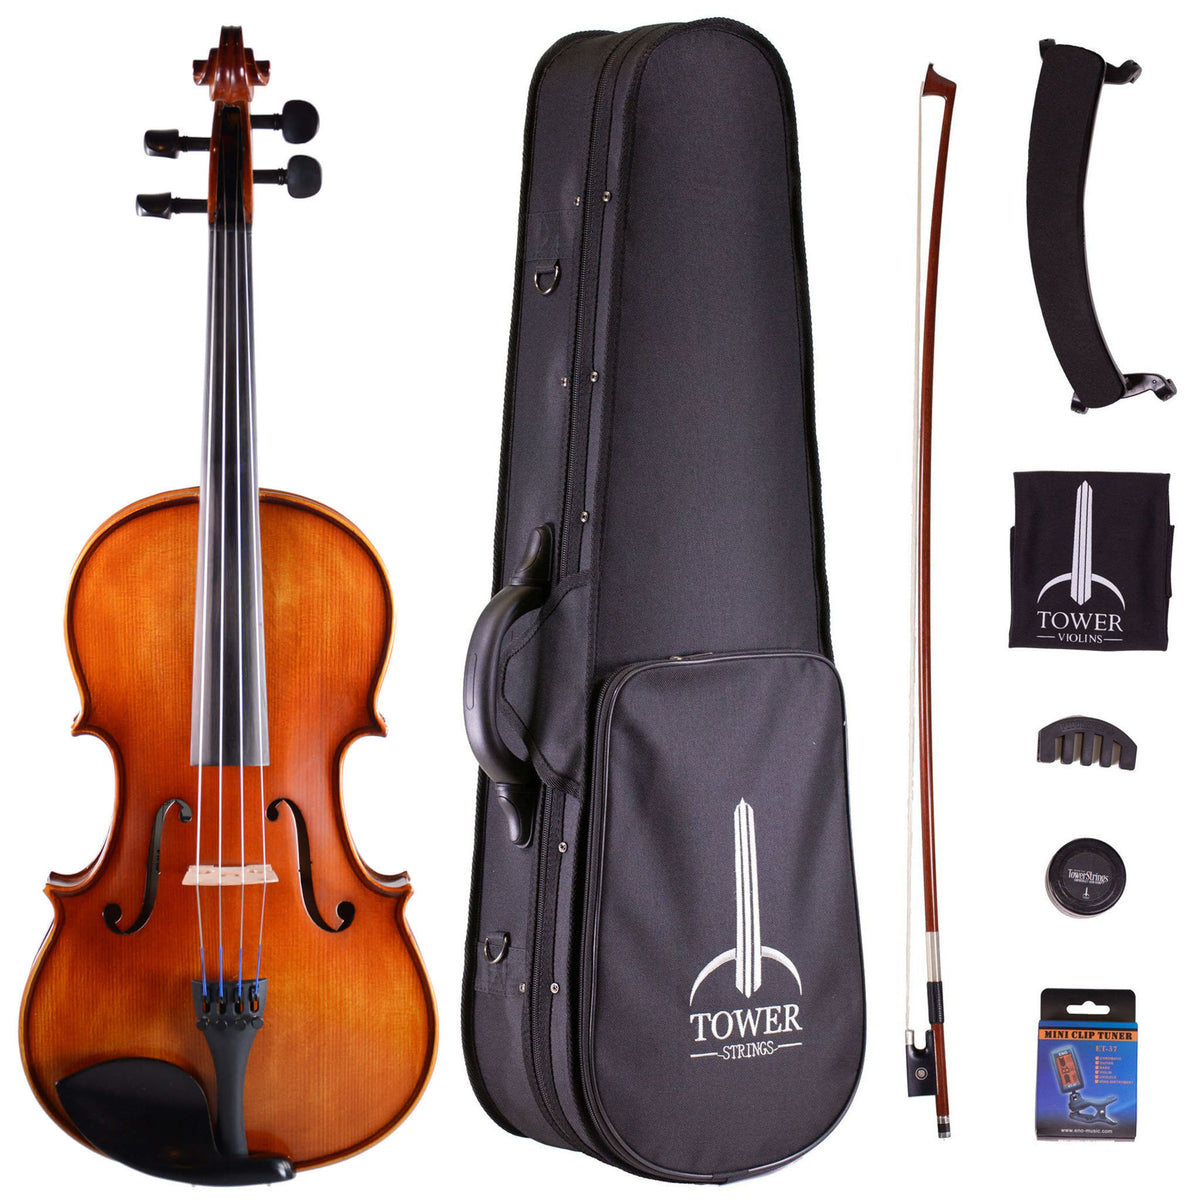 B-Stock Tower Strings Entertainer Violin Outfit